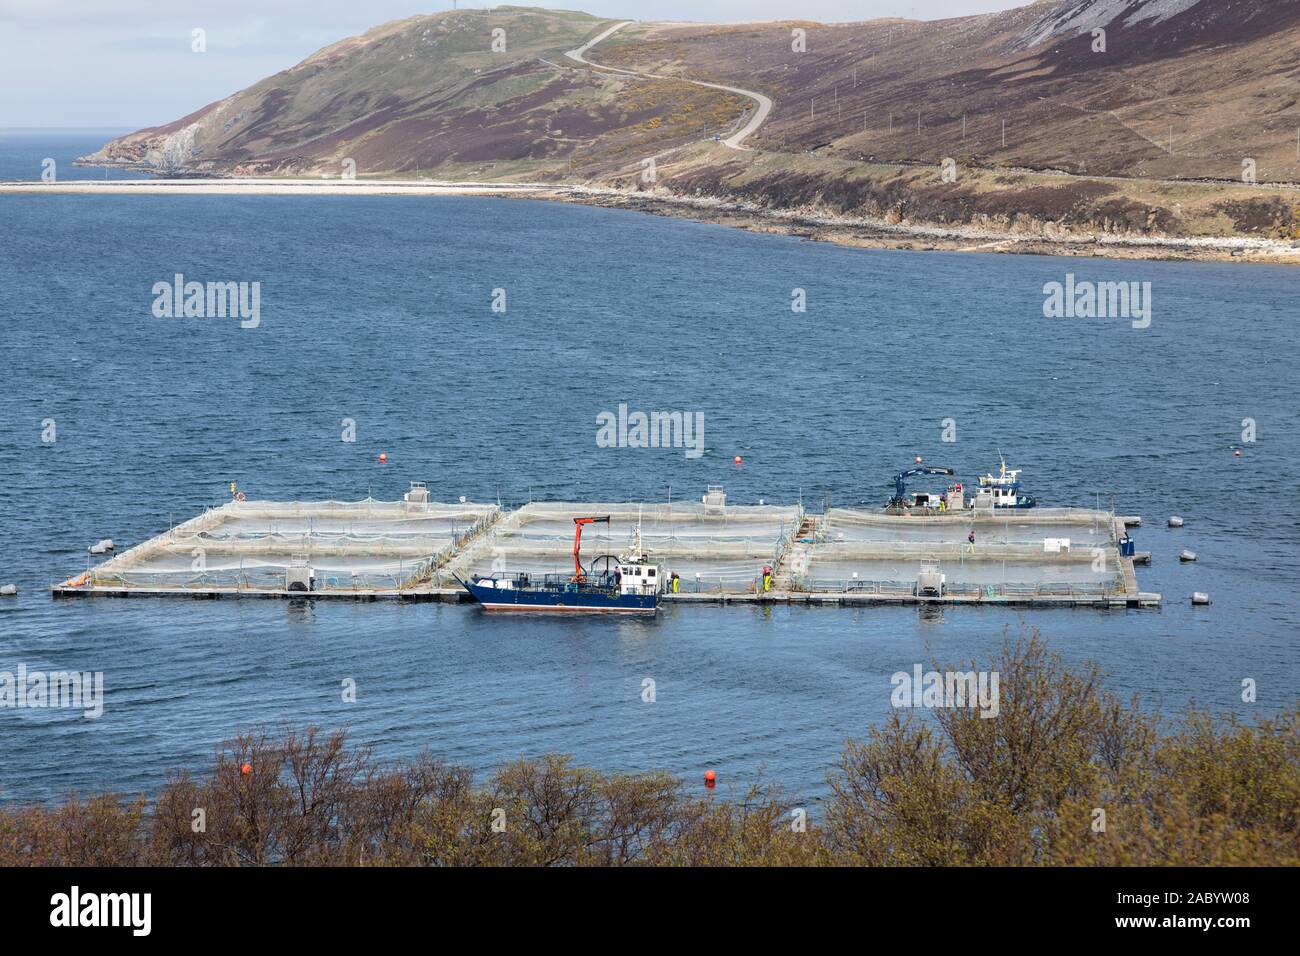 Salmon cages on a fish farm in Loch Eriboll, Scotland Stock Photo